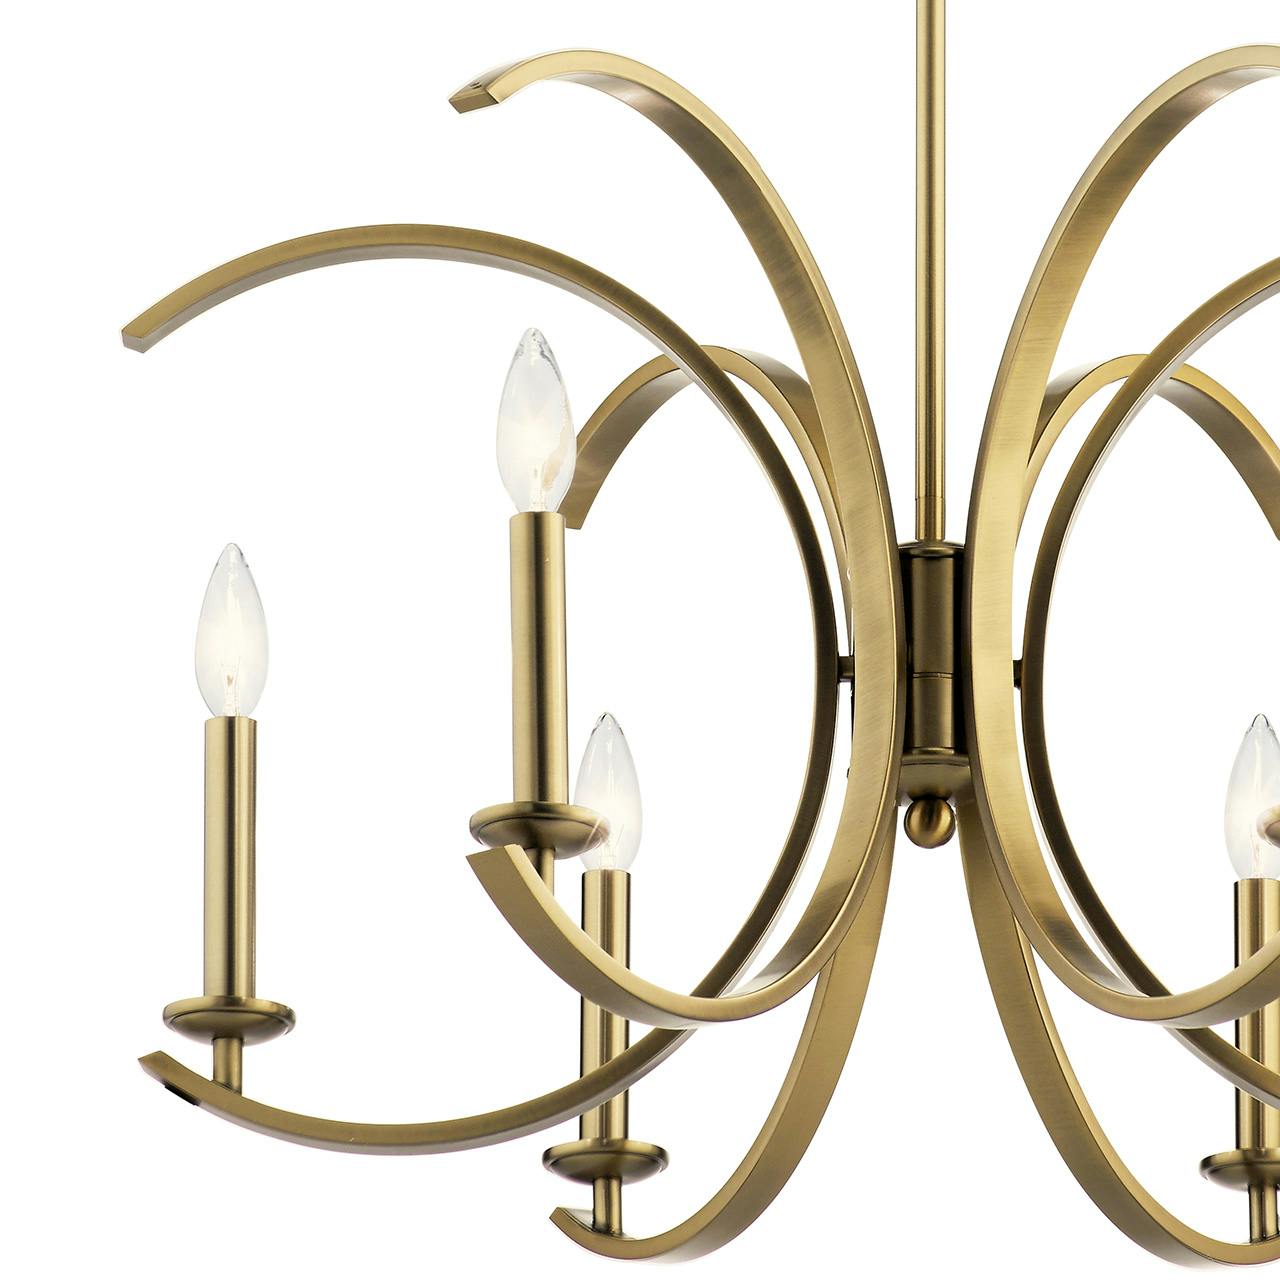 Close up view of the Cassadee 16.5" 6 Light Chandelier Brass on a white background